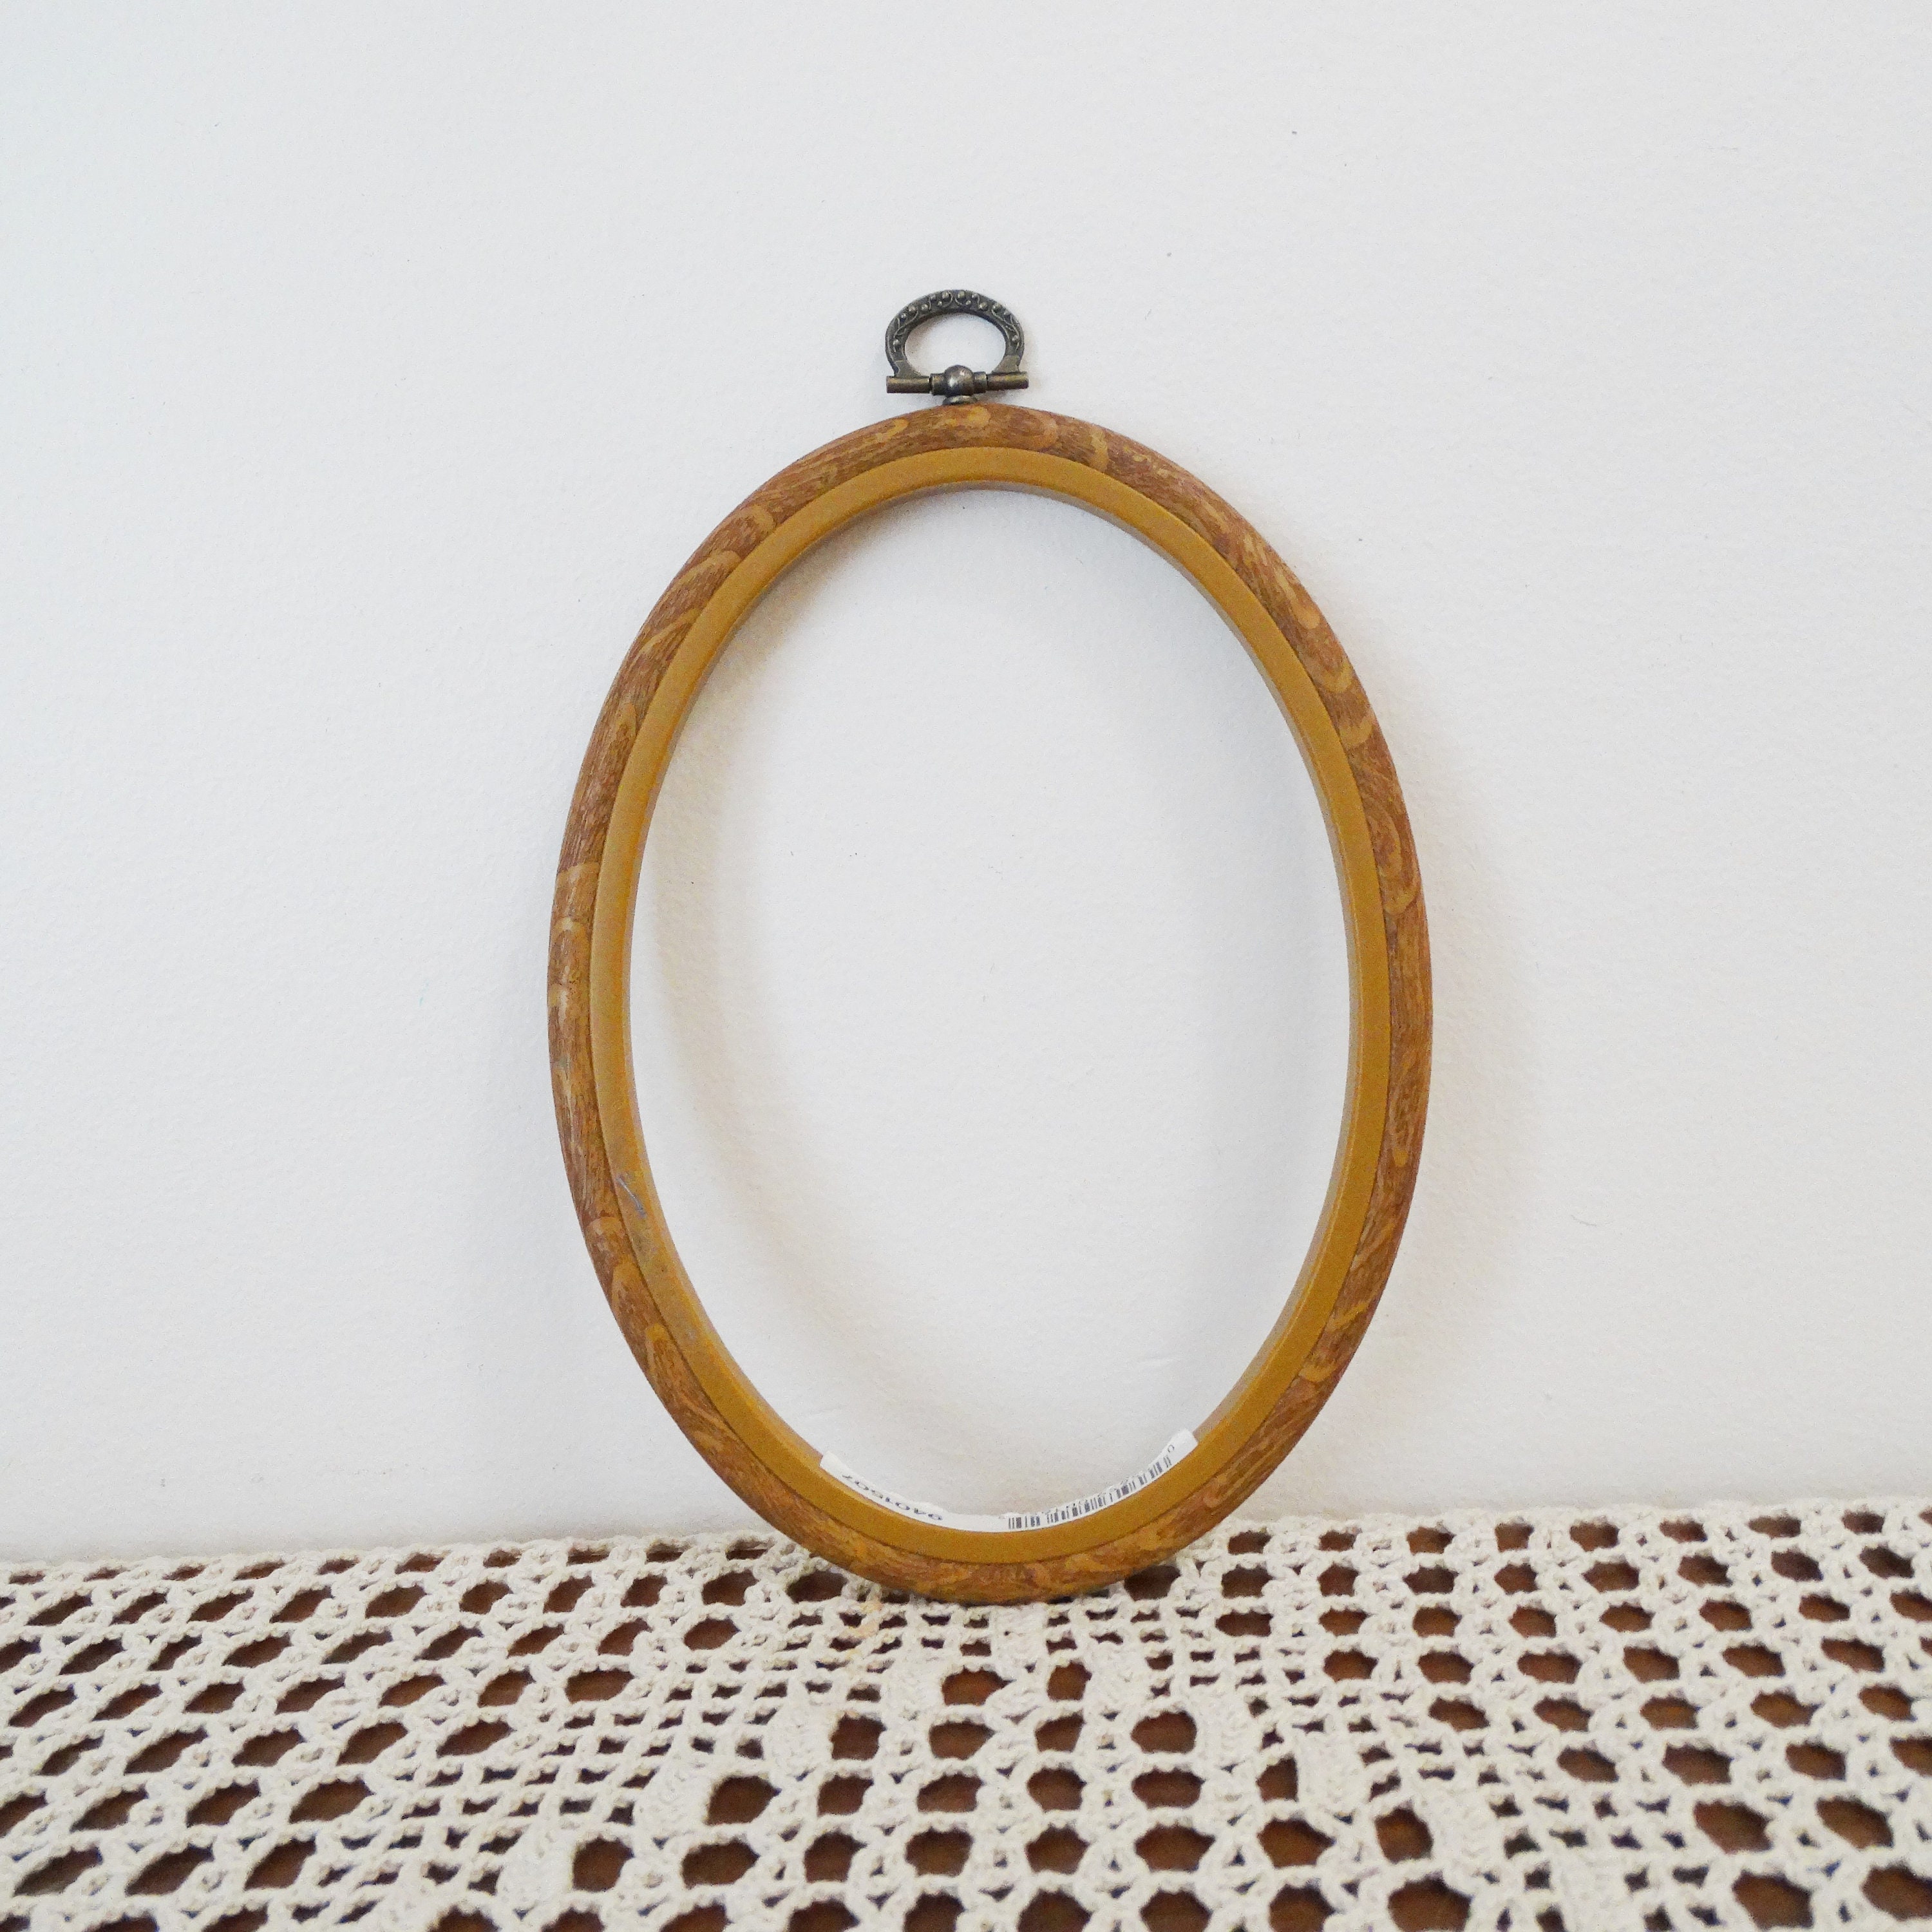 Wooden Grain Plastic Embroidery Hoop 5 Inch - Thimbles